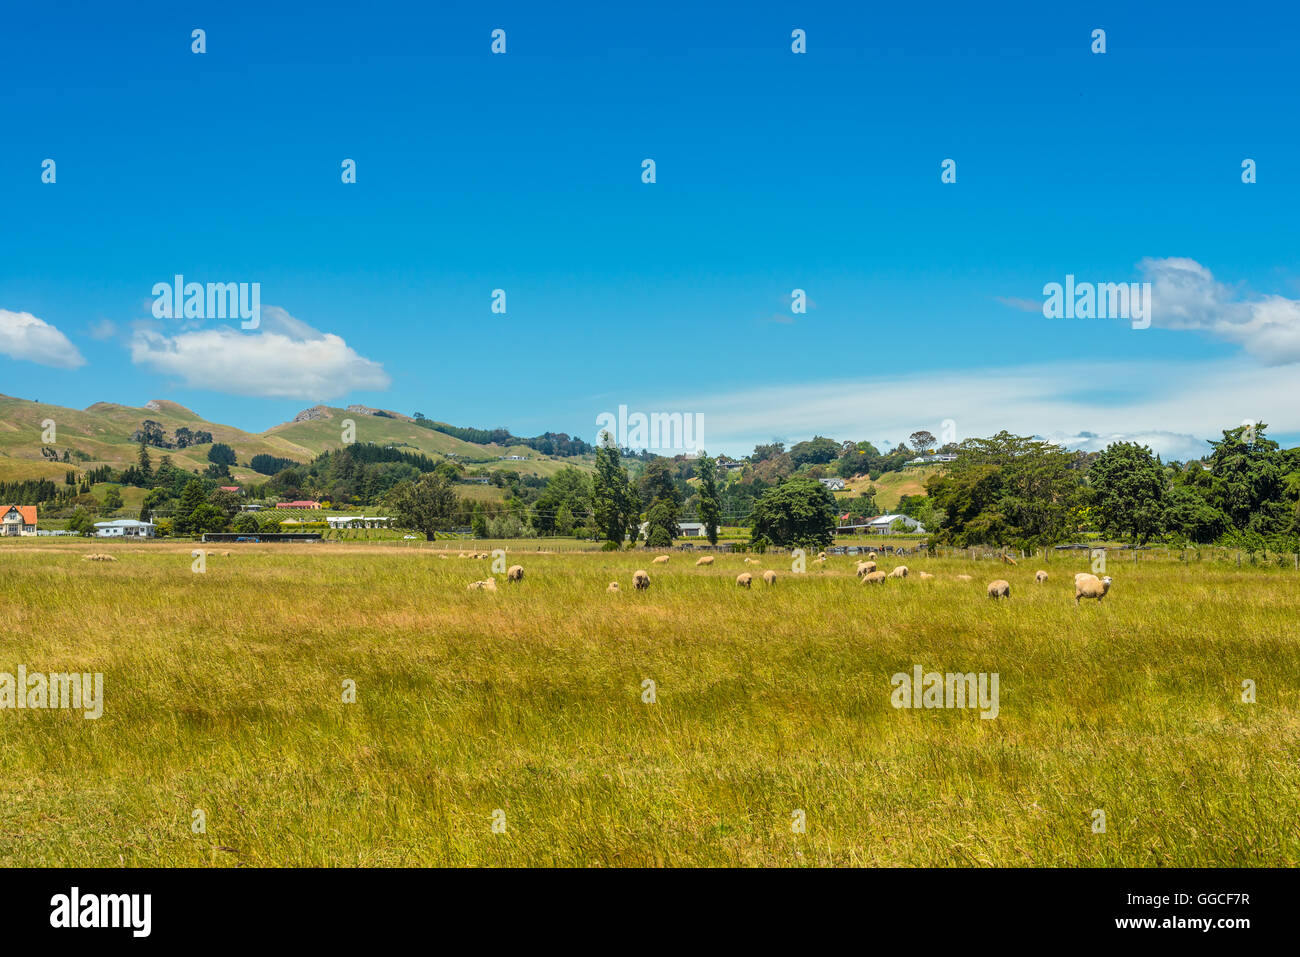 Hill view farm rural area - Sheep on the meadow in the foreground - North Island New Zealand Stock Photo